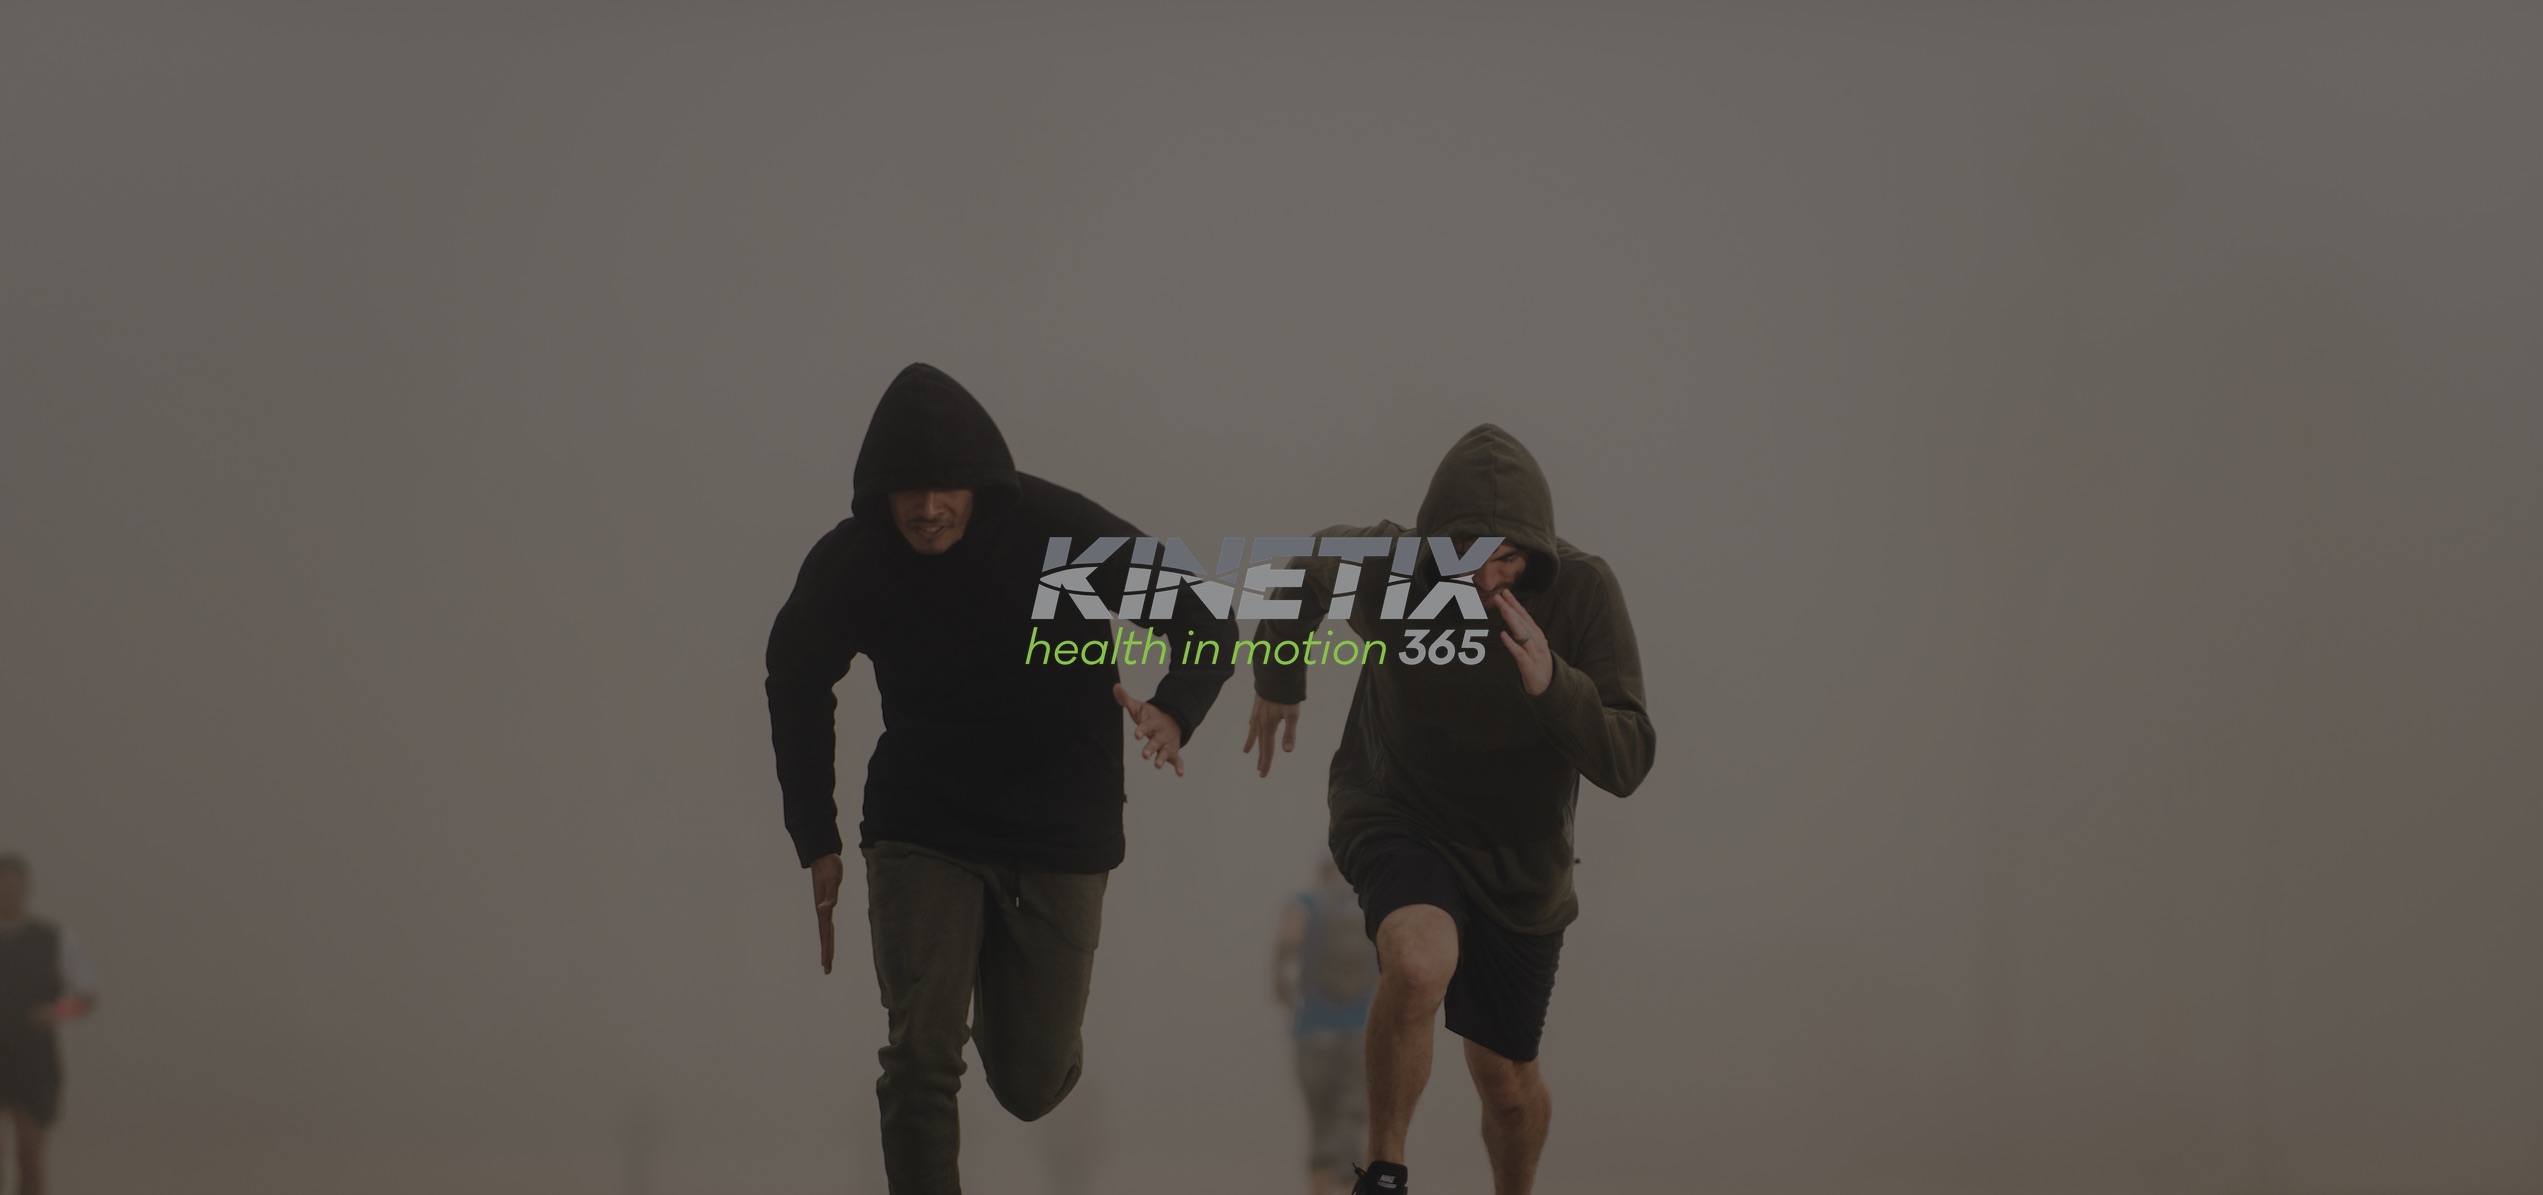 Kinetix Featured Image Kinetix Health in Motion 365 logo with two men running in the background